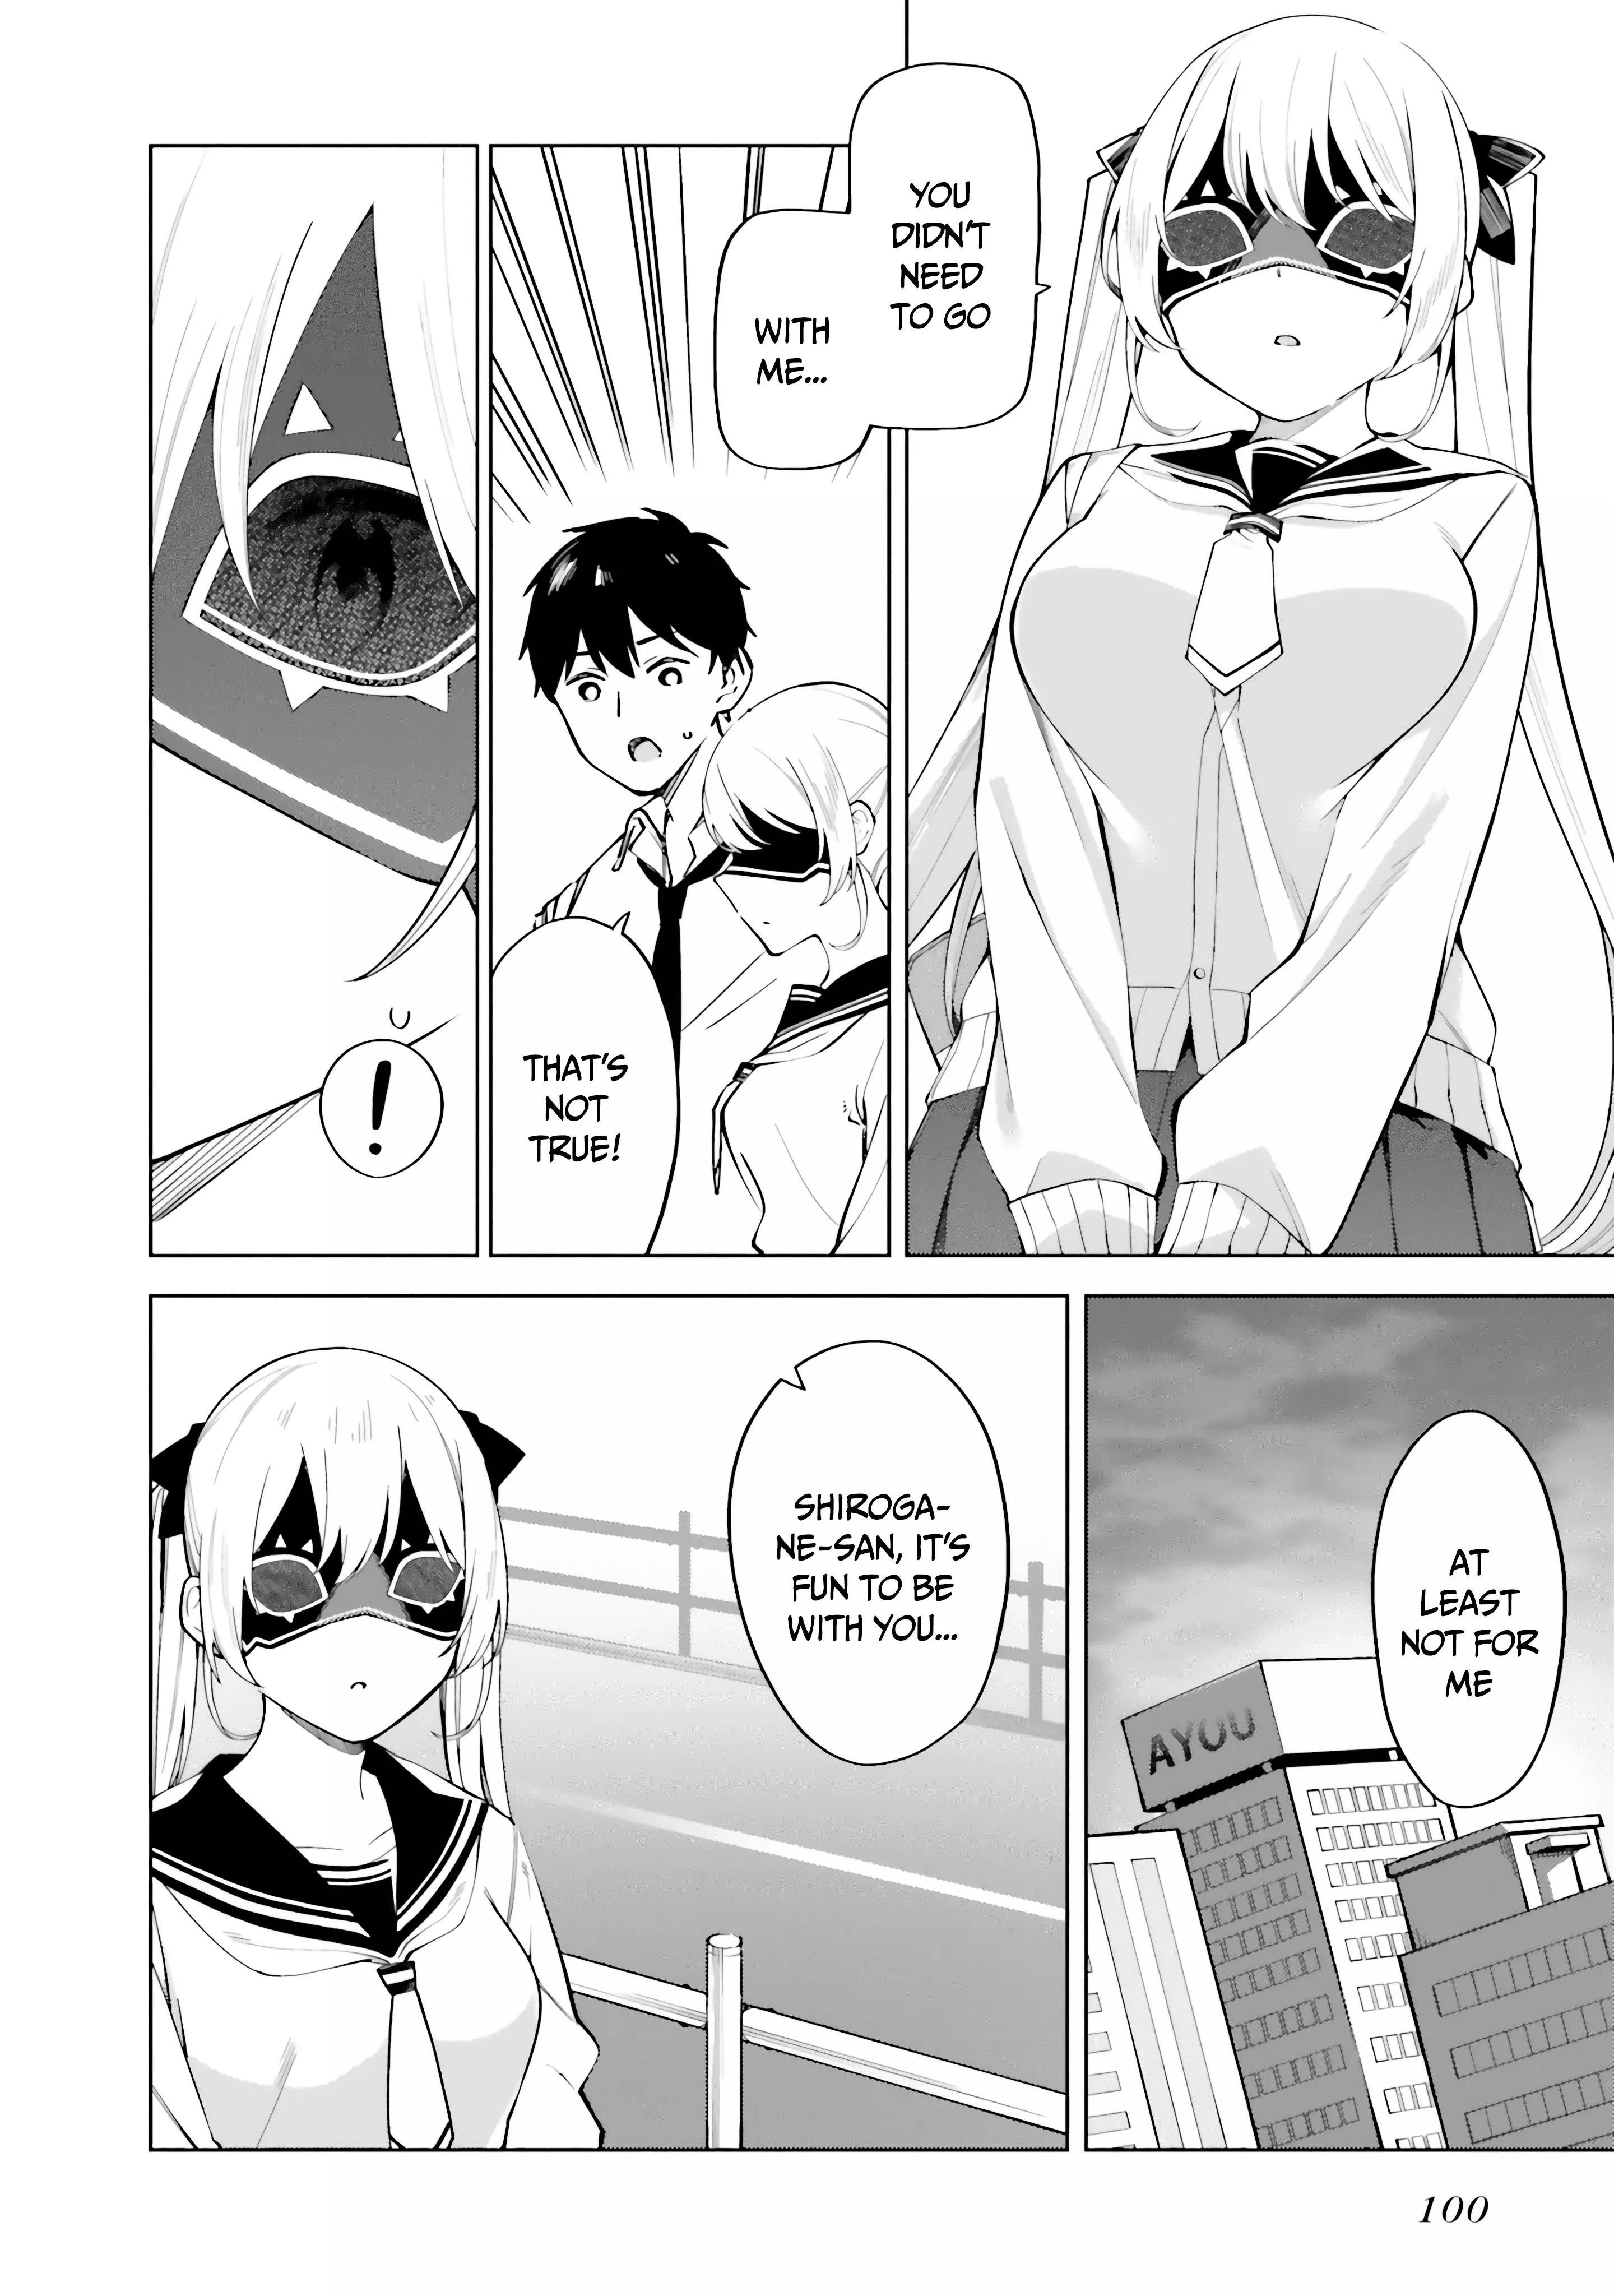 I Don't Understand Shirogane-San's Facial Expression At All - 16 page 9-e126accf